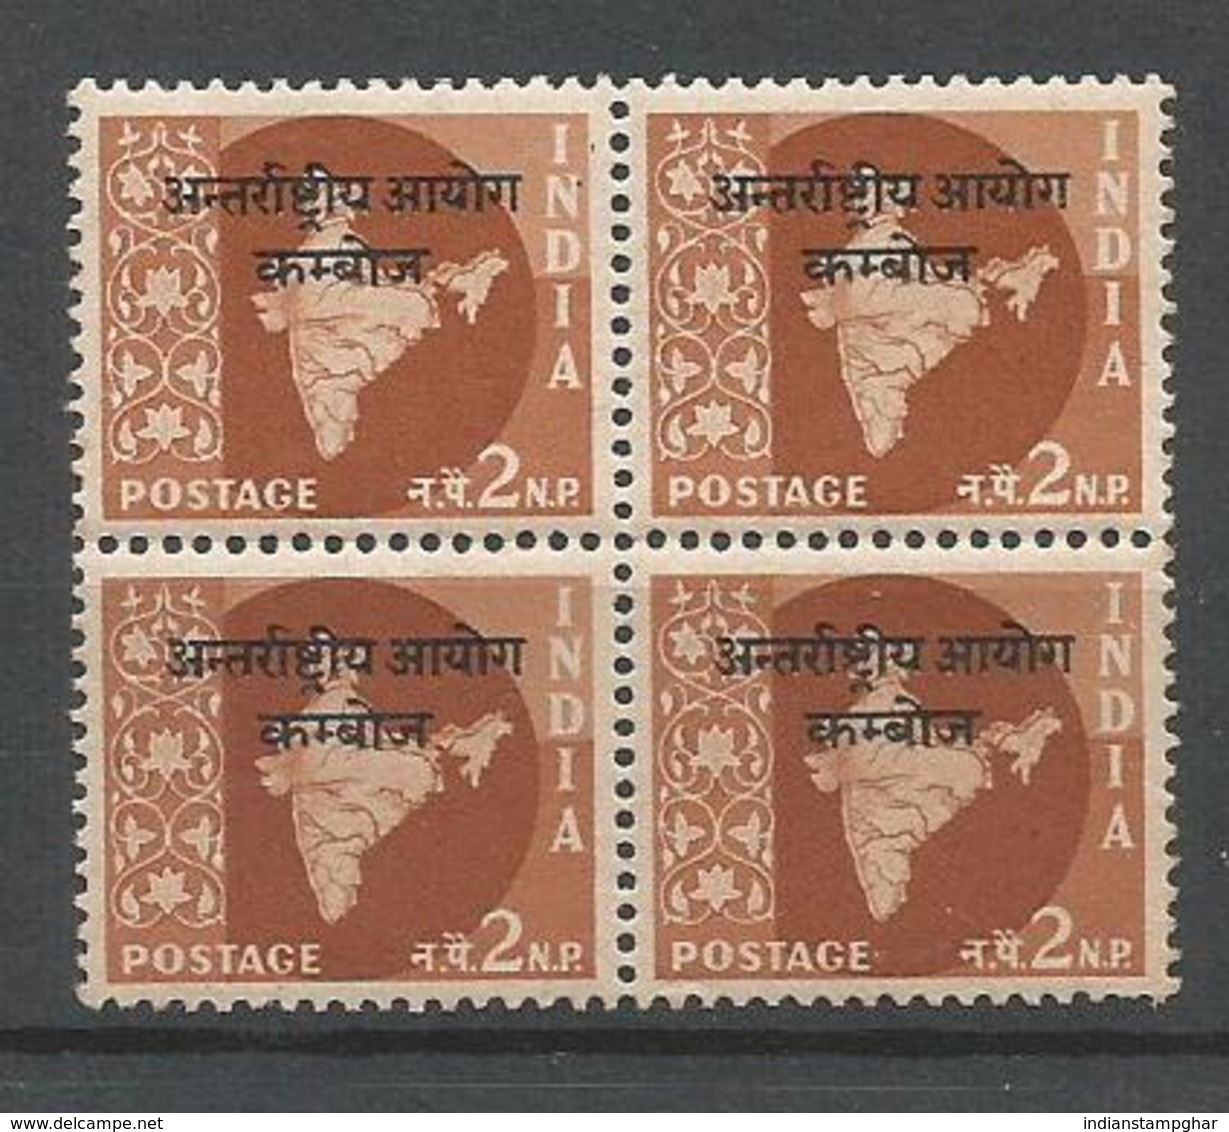 Cambodia Opvt. On 2np Map, Block Of 4, MNH 1962 Star Wmk, Military Stamps, As Per Scan - Military Service Stamp